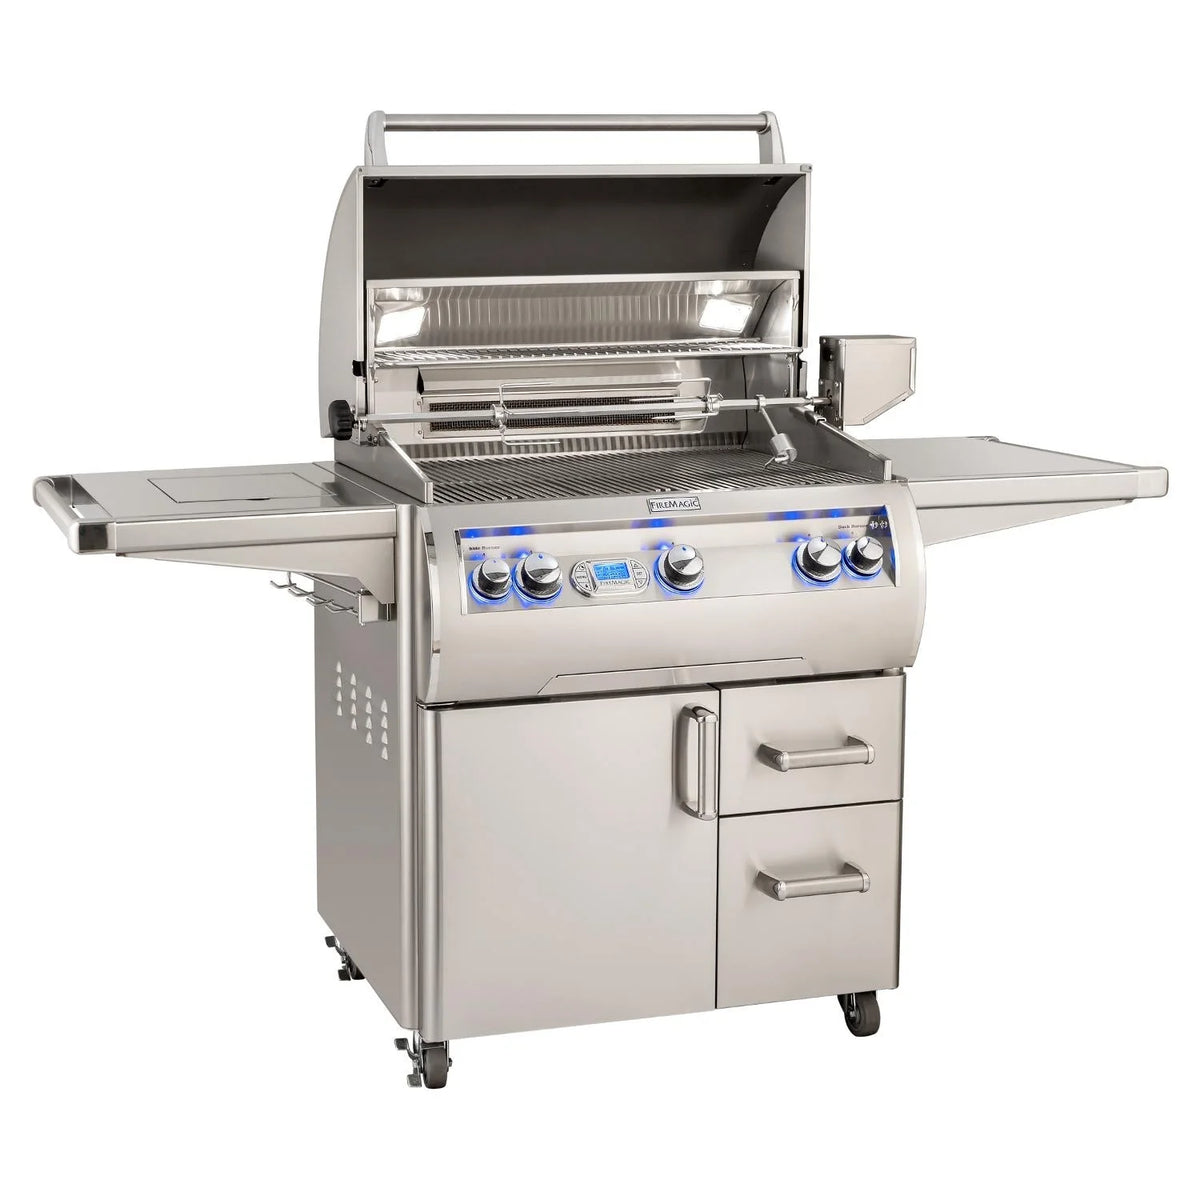 Fire Magic Echelon Diamond 30 Inch 3 Burner Freestanding Gas Grill with Rotisserie and Digital Thermometer